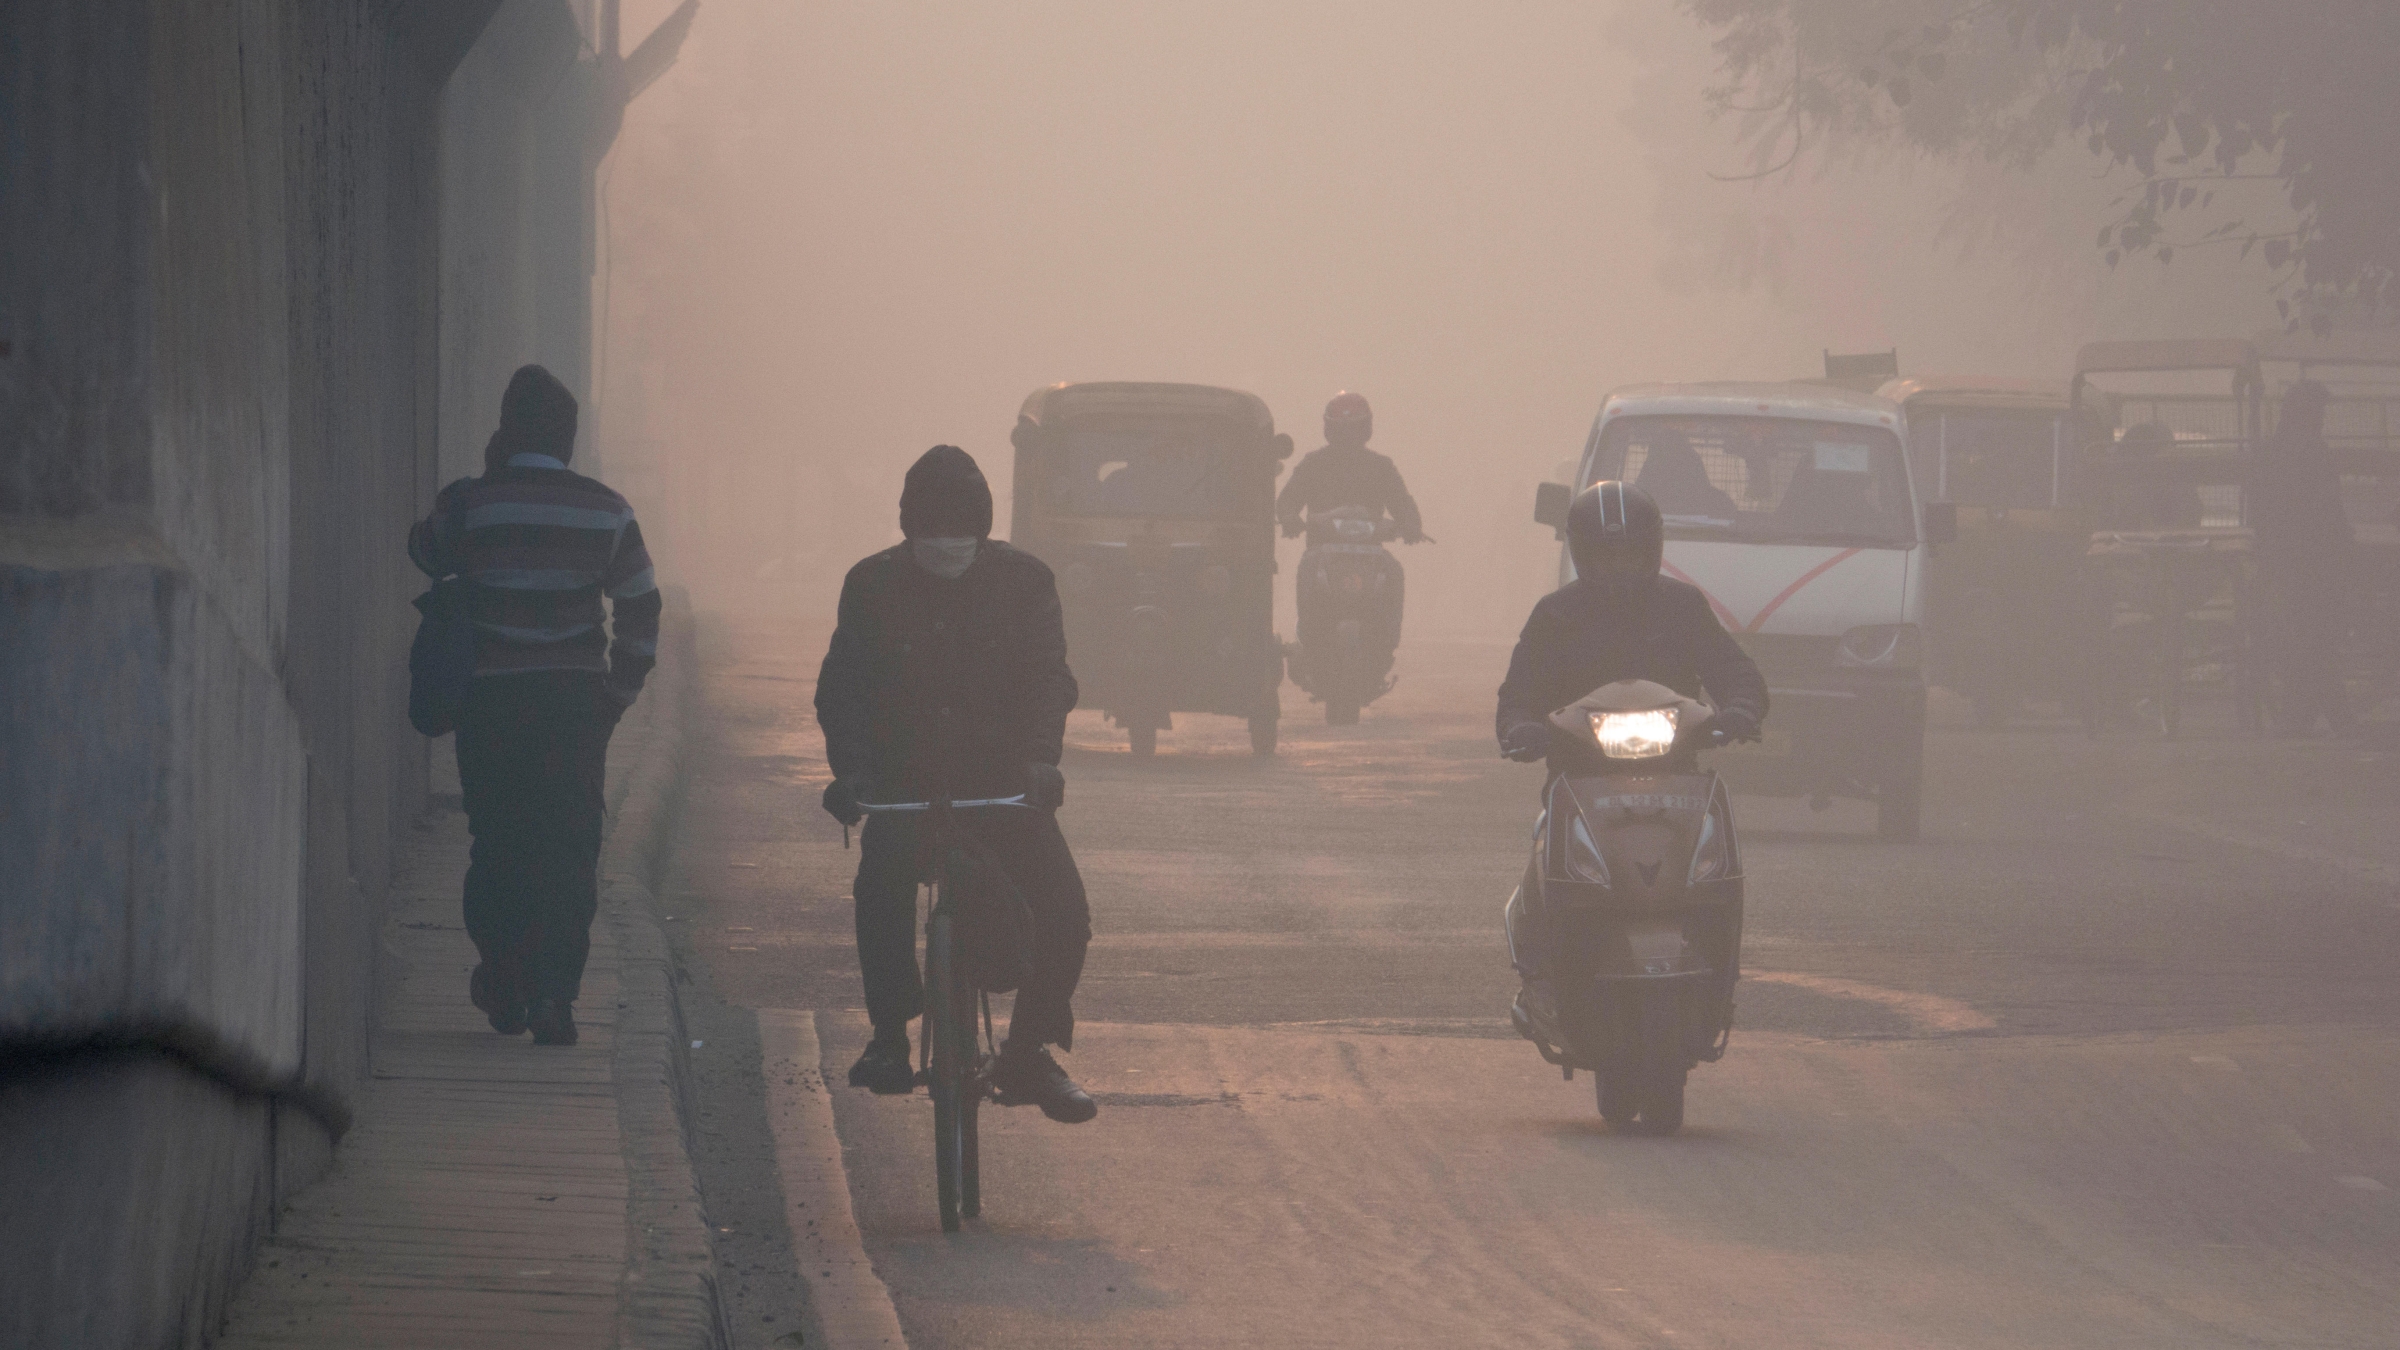 Commuters in hazardous levels of air pollution in New Delhi, India